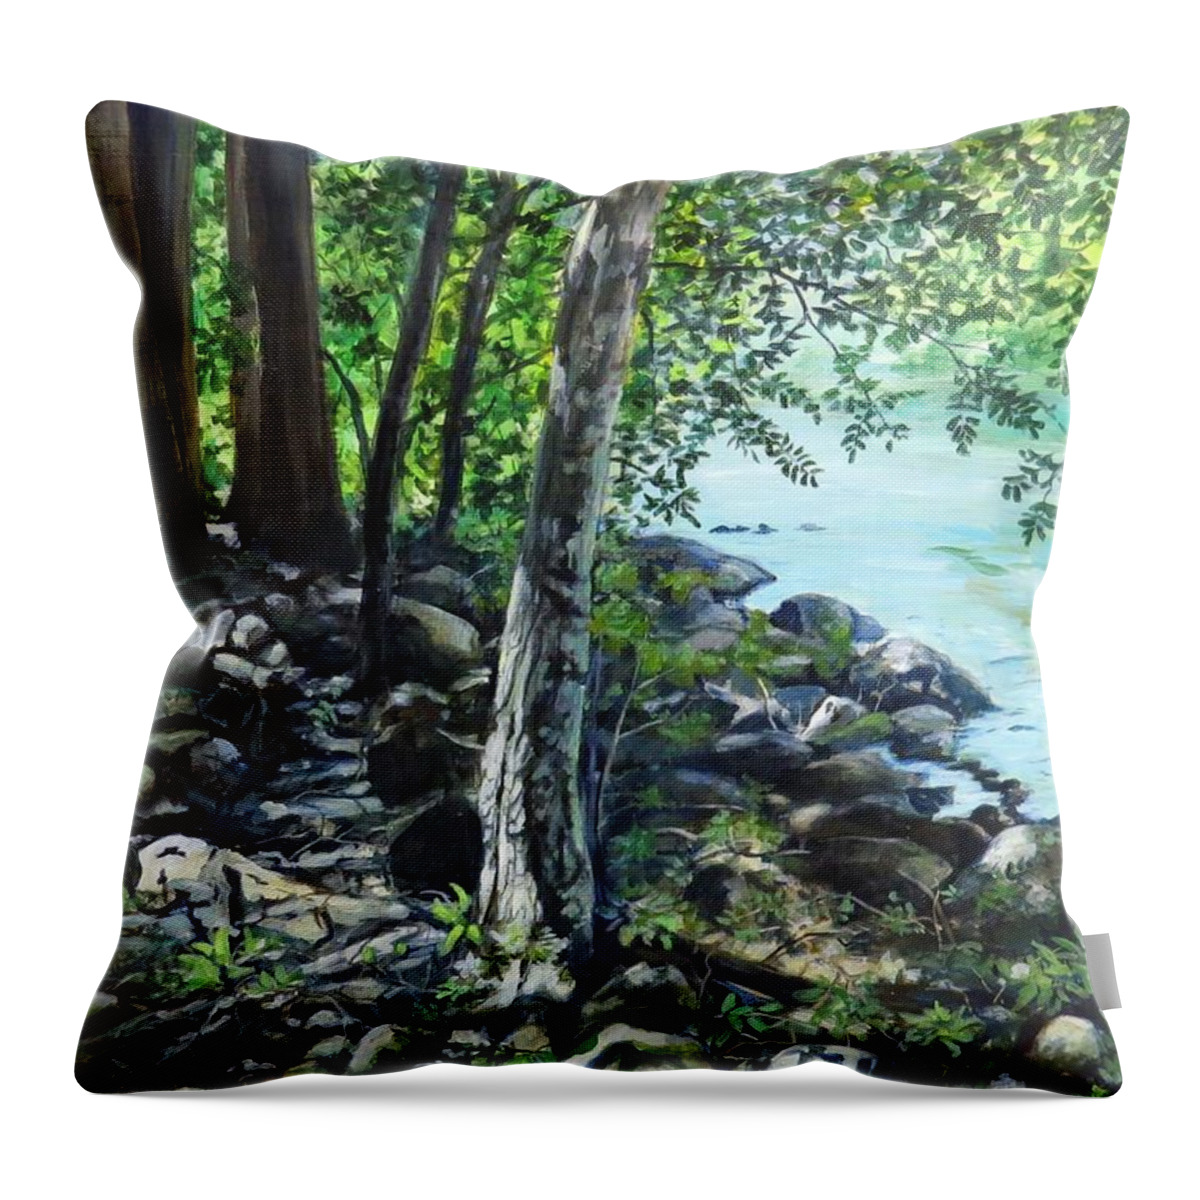 River Throw Pillow featuring the painting Shadows On The Bank by William Brody